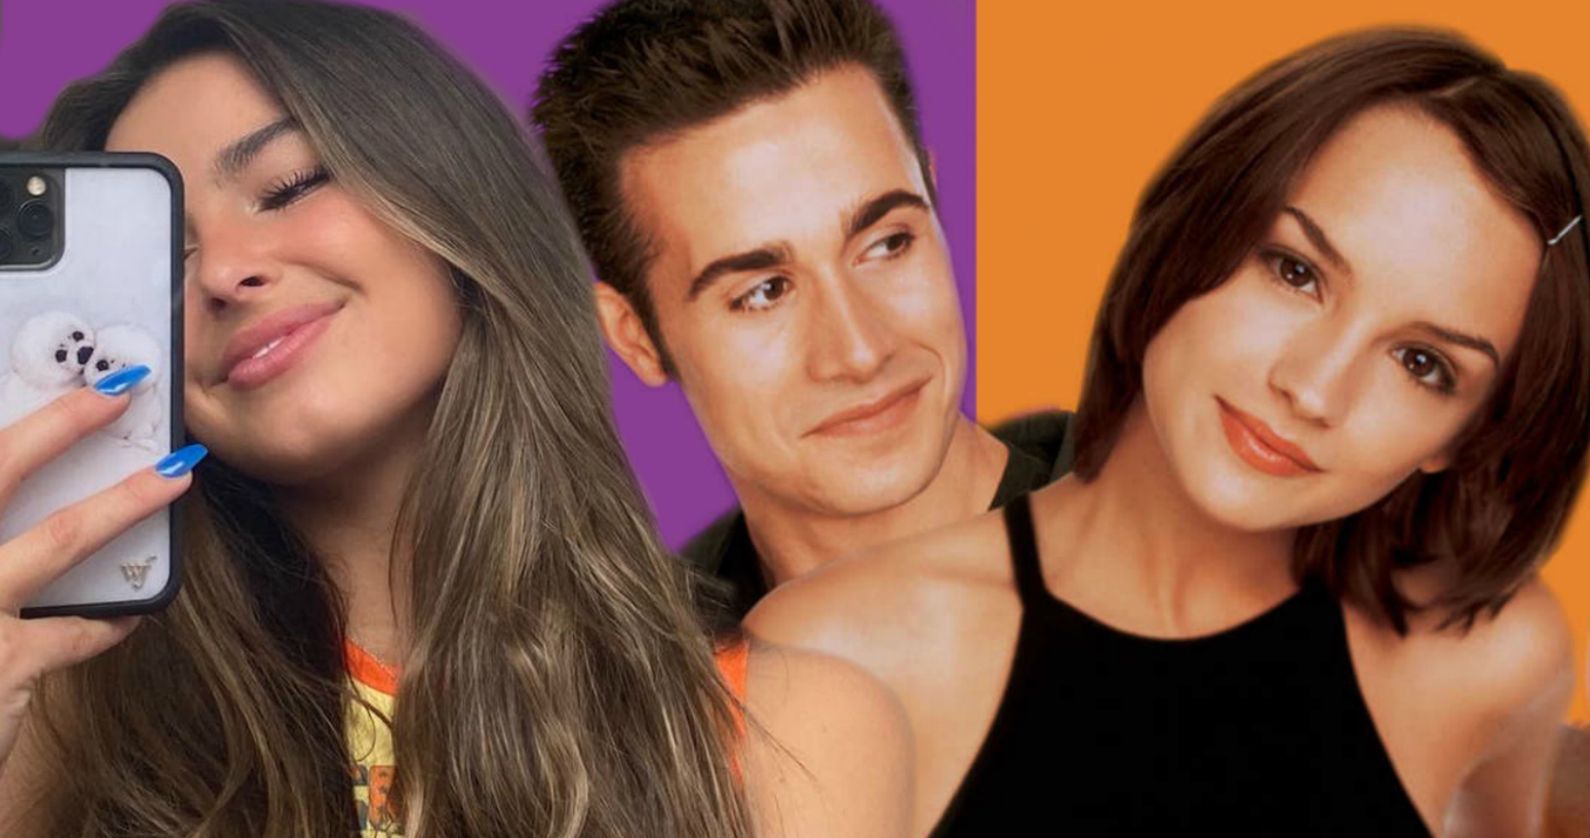 She's All That Gender-Swapped Reboot Gets TikTok Star Addison Rae